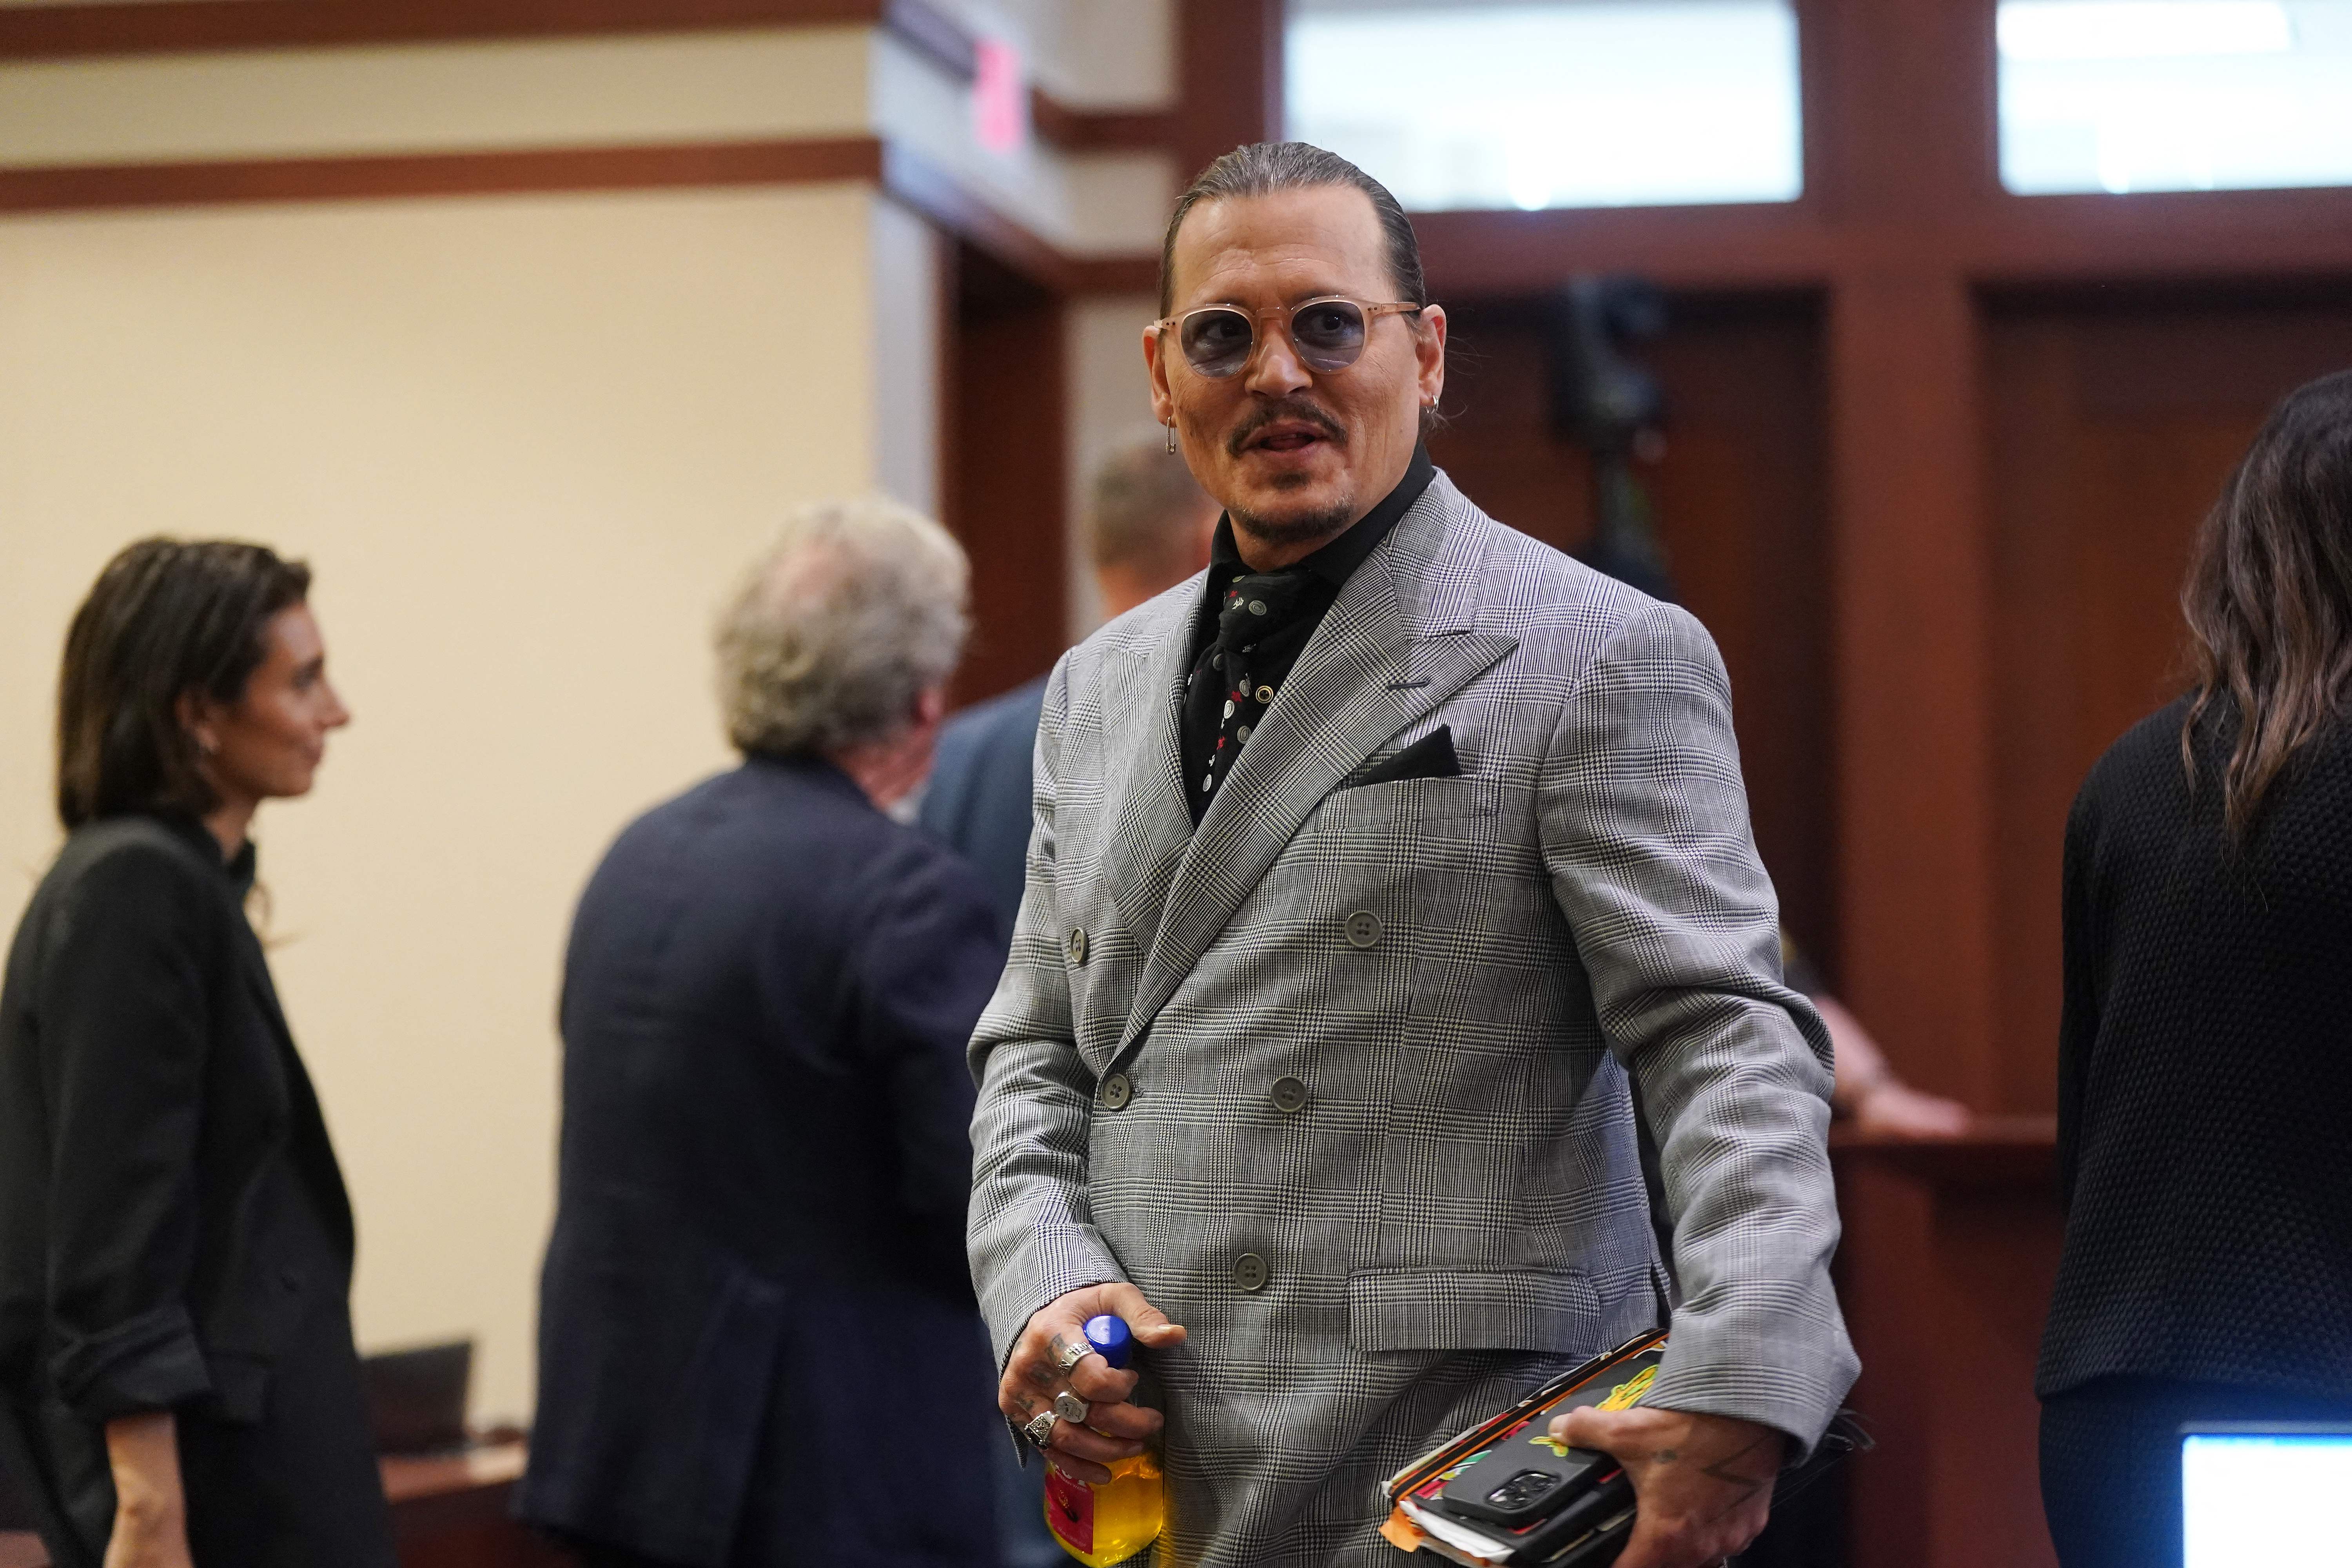 Johnny Depp during his trial at the Fairfax County Circuit Court on May 19, 2022 in Fairfax, Virginia | Source: Getty Images